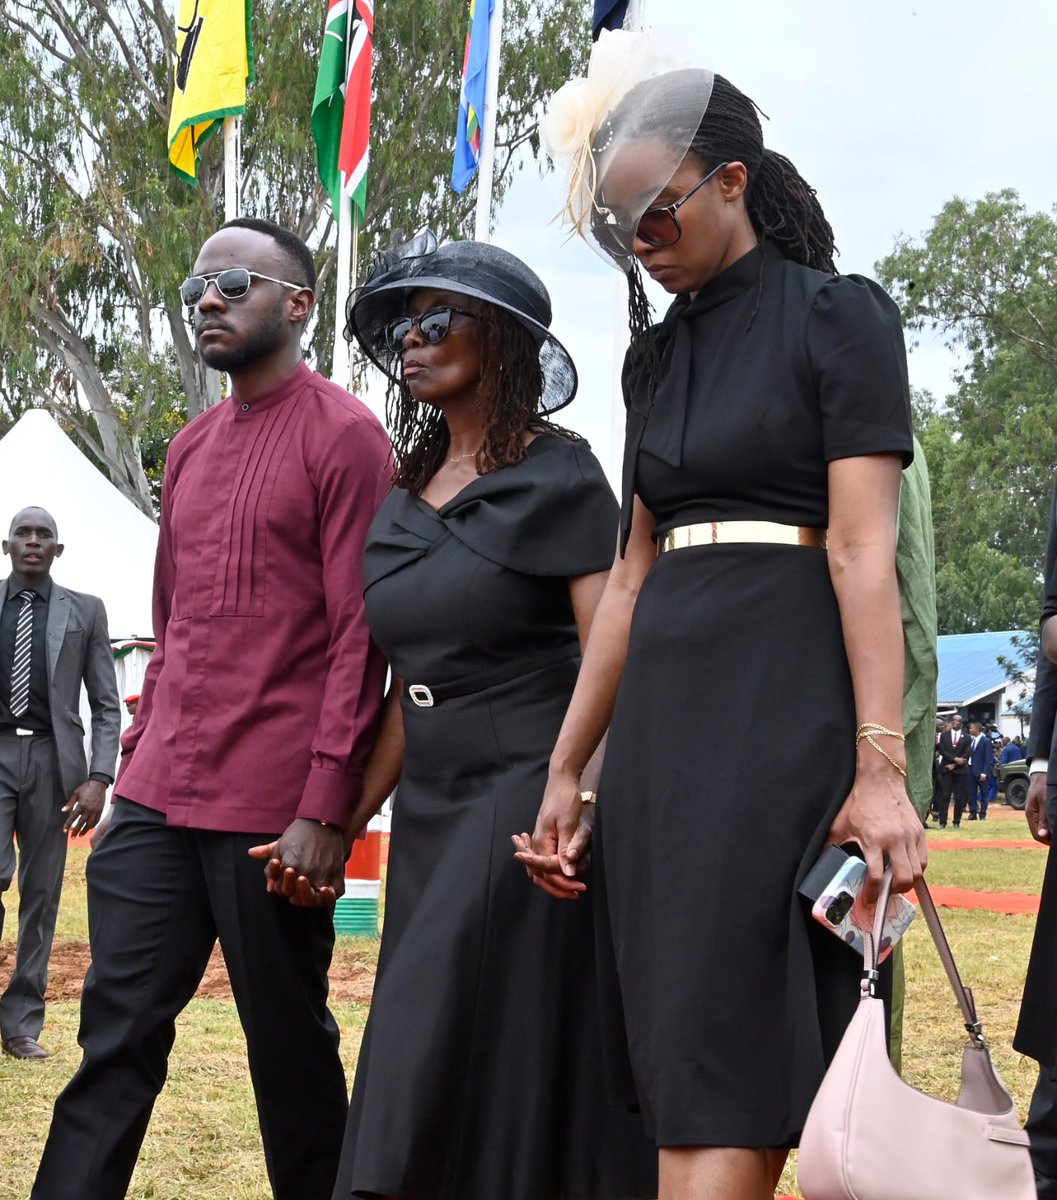 The late General Francis Ogolla's wife and children during his final send off at his home in Siaya County

#RIPGeneral #KDF #KenyaMilitary
Photo: William Ruto (X)